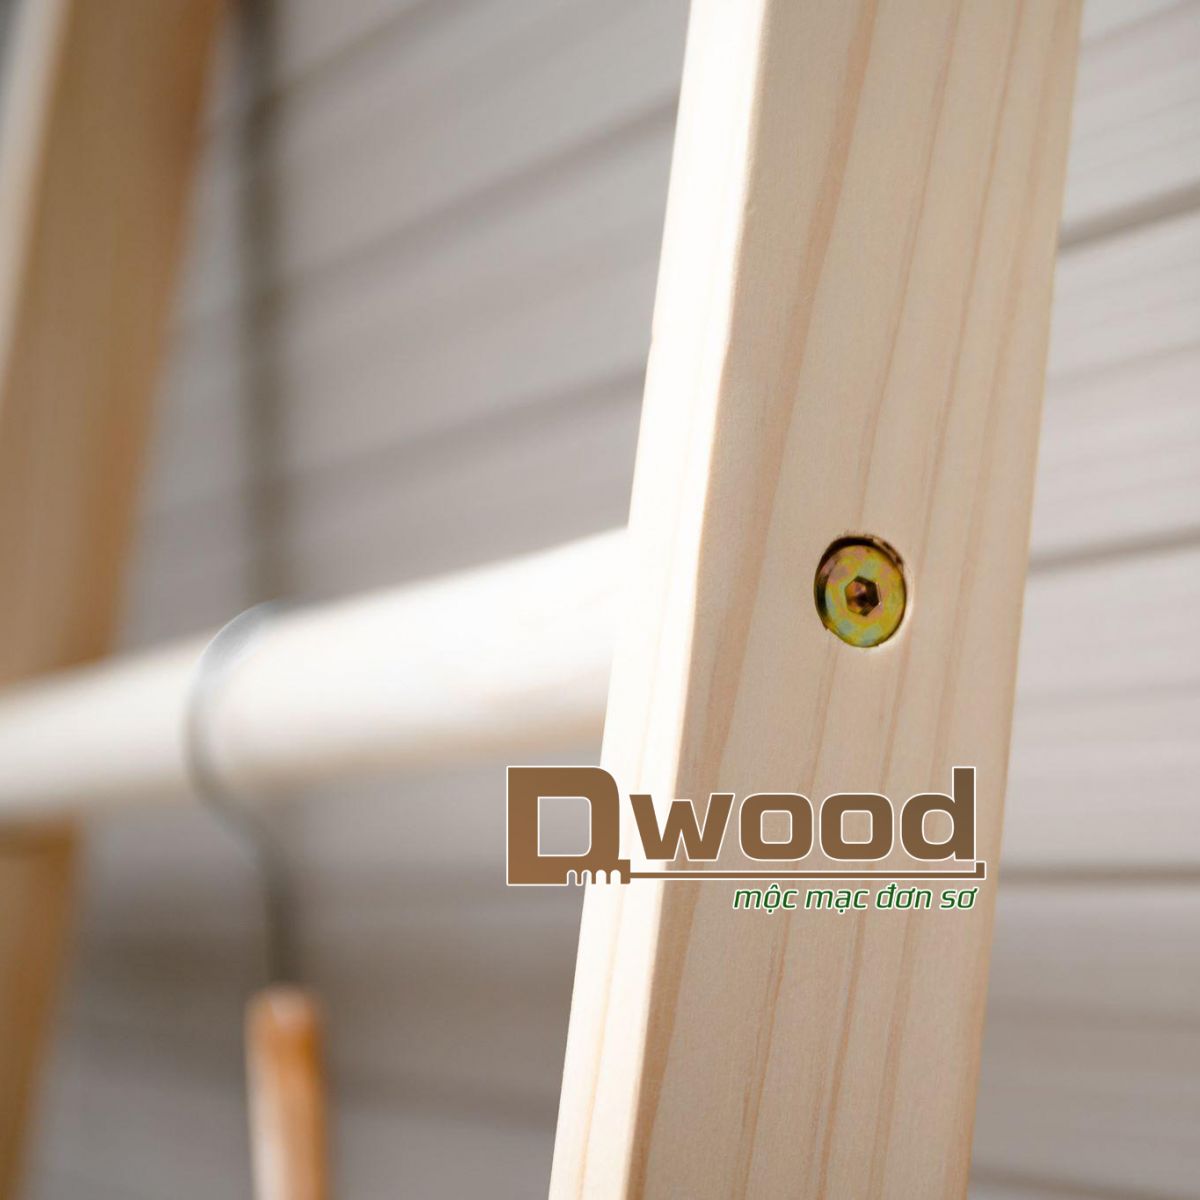 [Decor] Ladder Pine Wood DWOOD Decorate Space, Hanging Clothes